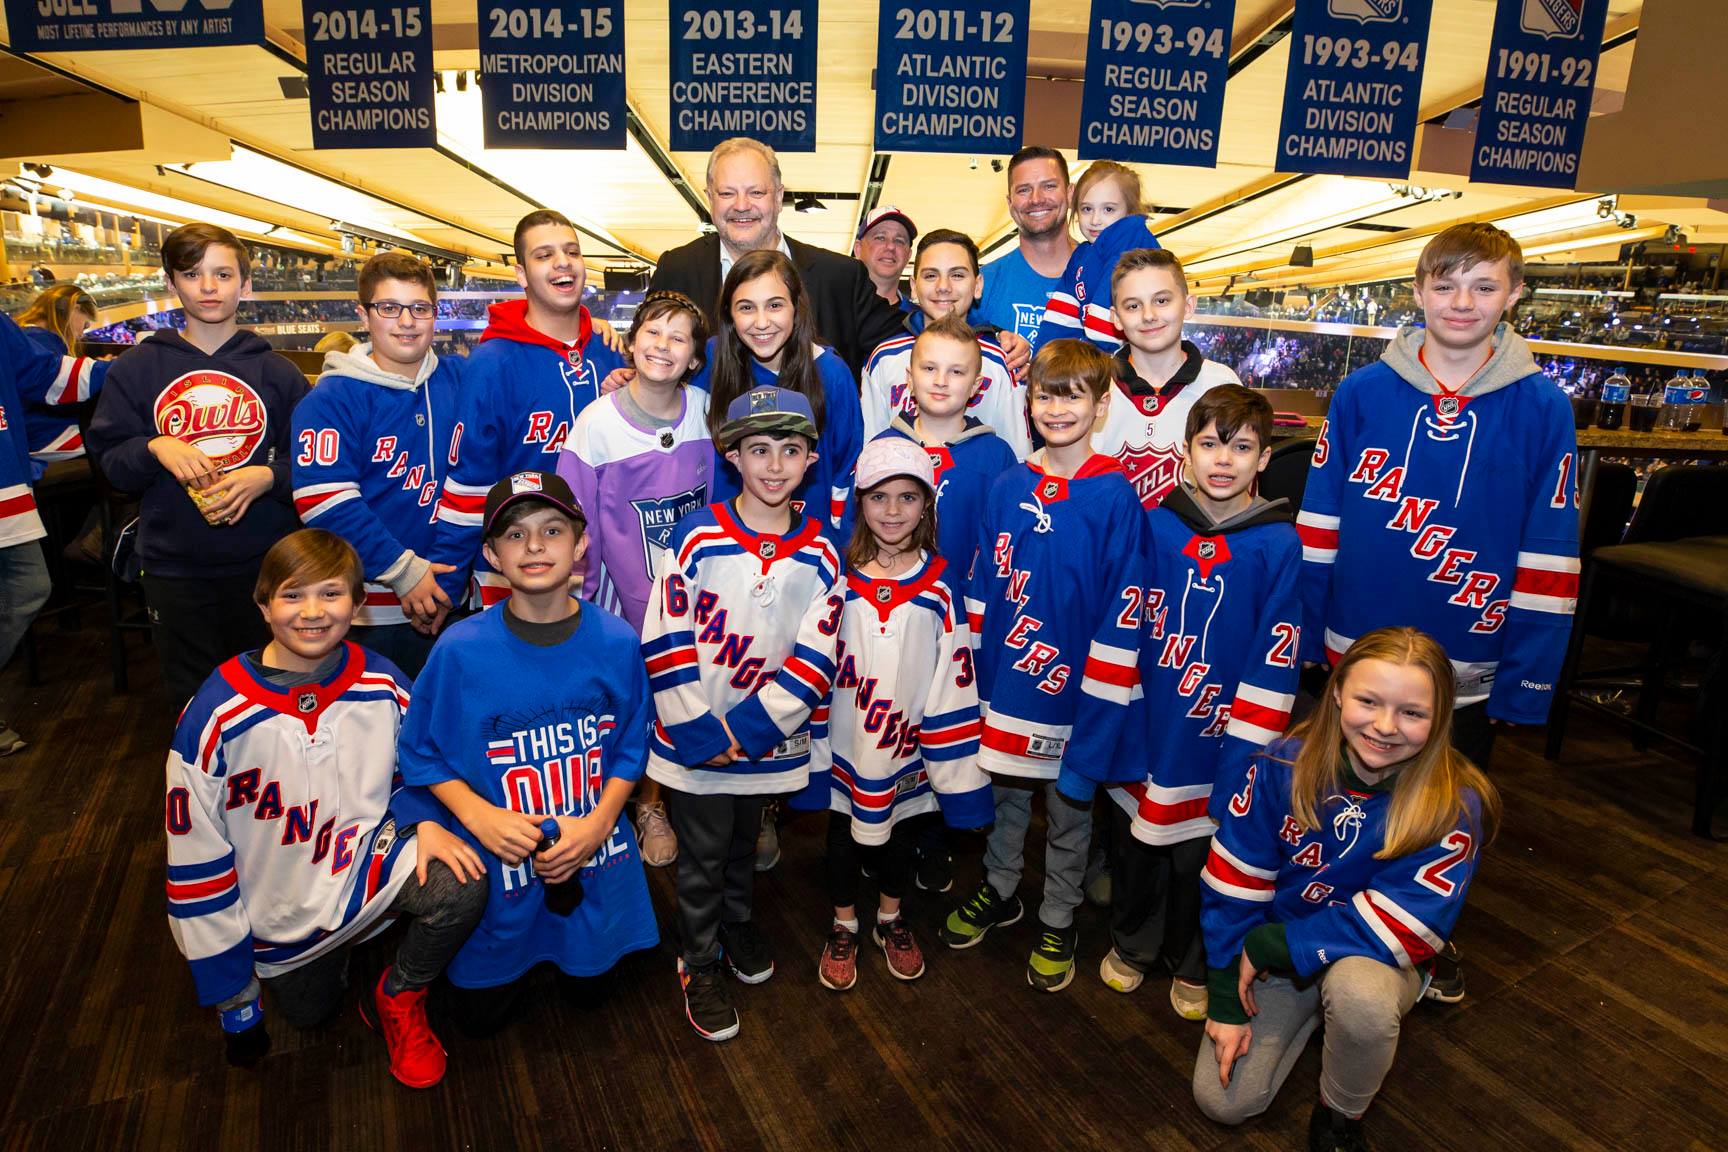 March 29th 2019: Final night in Henrik’s Crease of the NYR season. Garden of Dreams families met ’94 NYR Esa Tikkanen and cheered on the NYR to a victory at MSG.